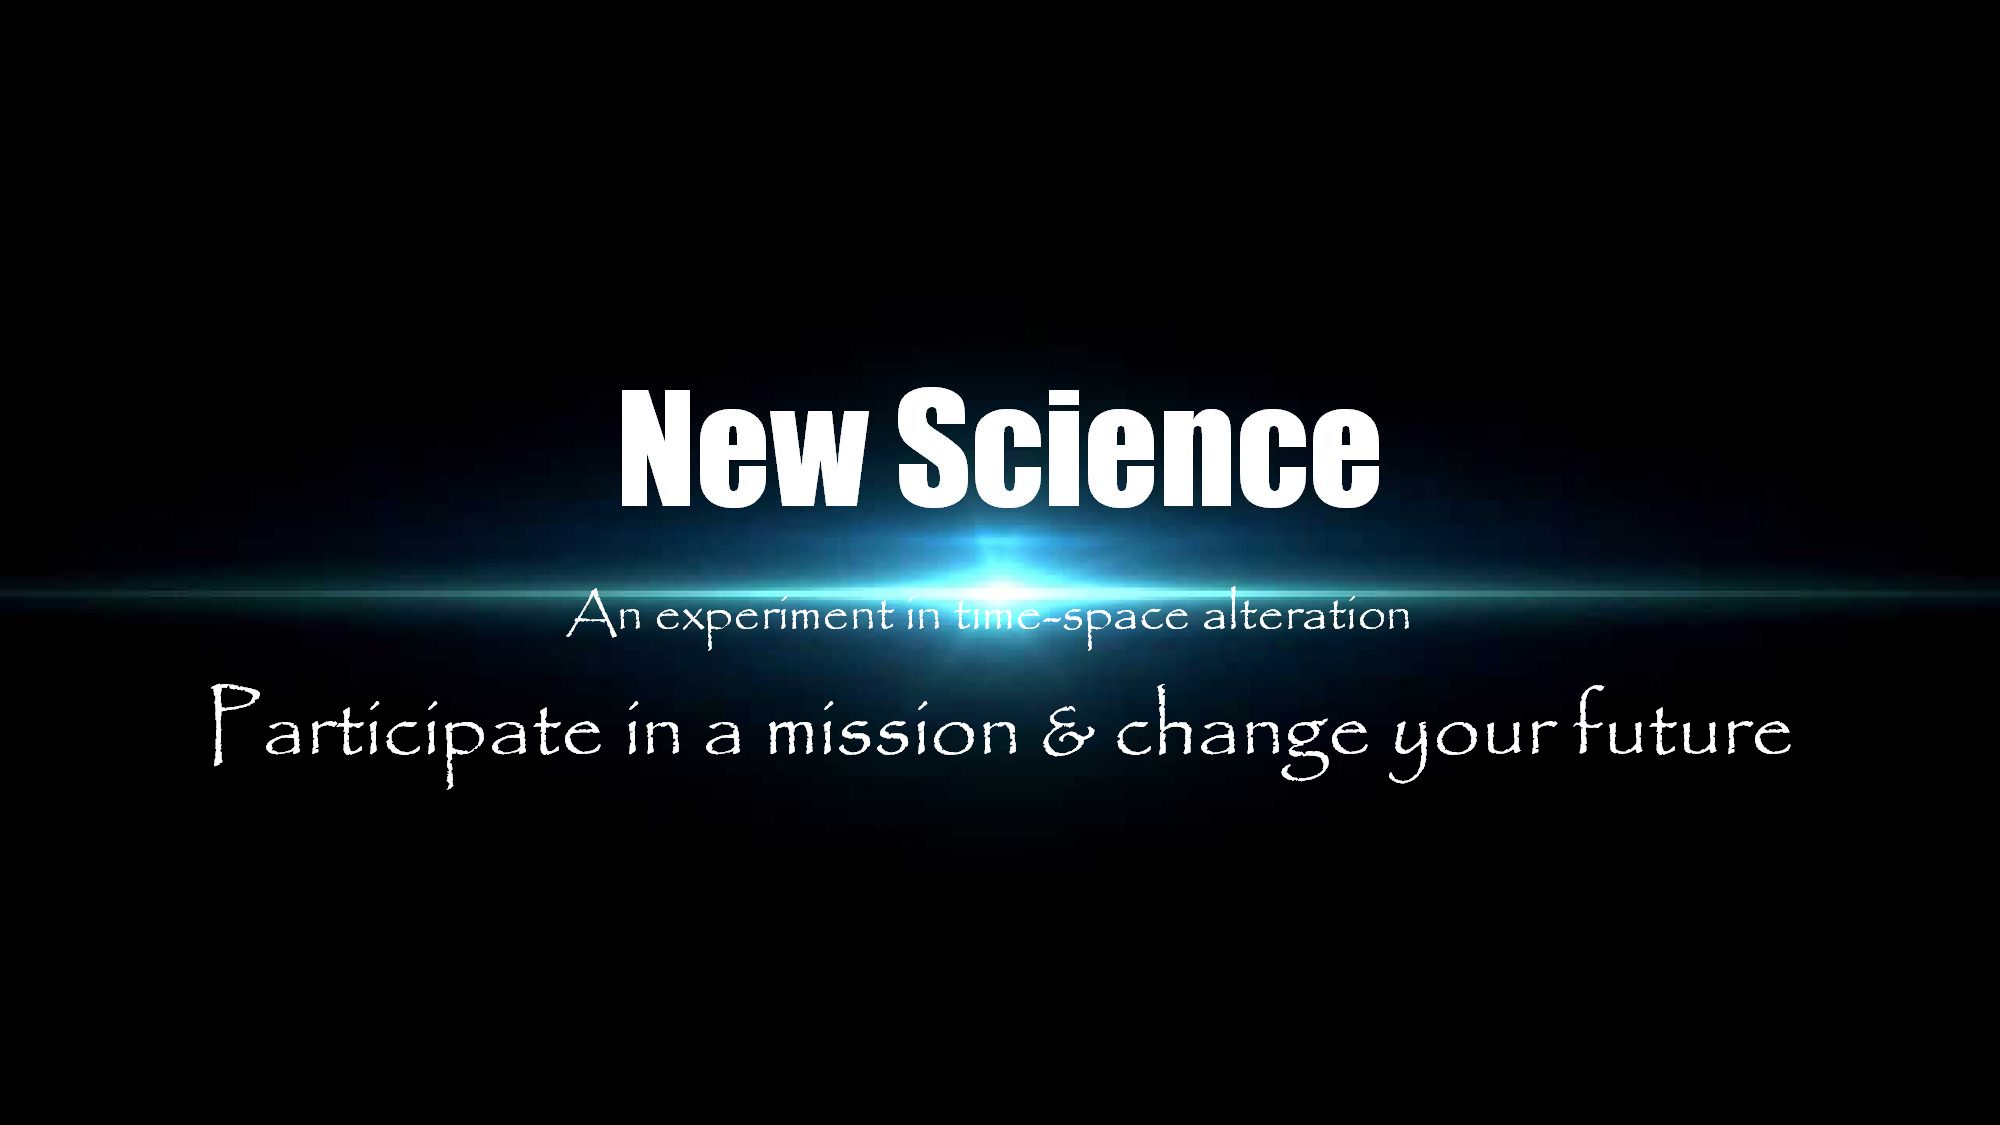 Participate In a Mission & Change Your Future: An Experiment In Time-Space Alteration